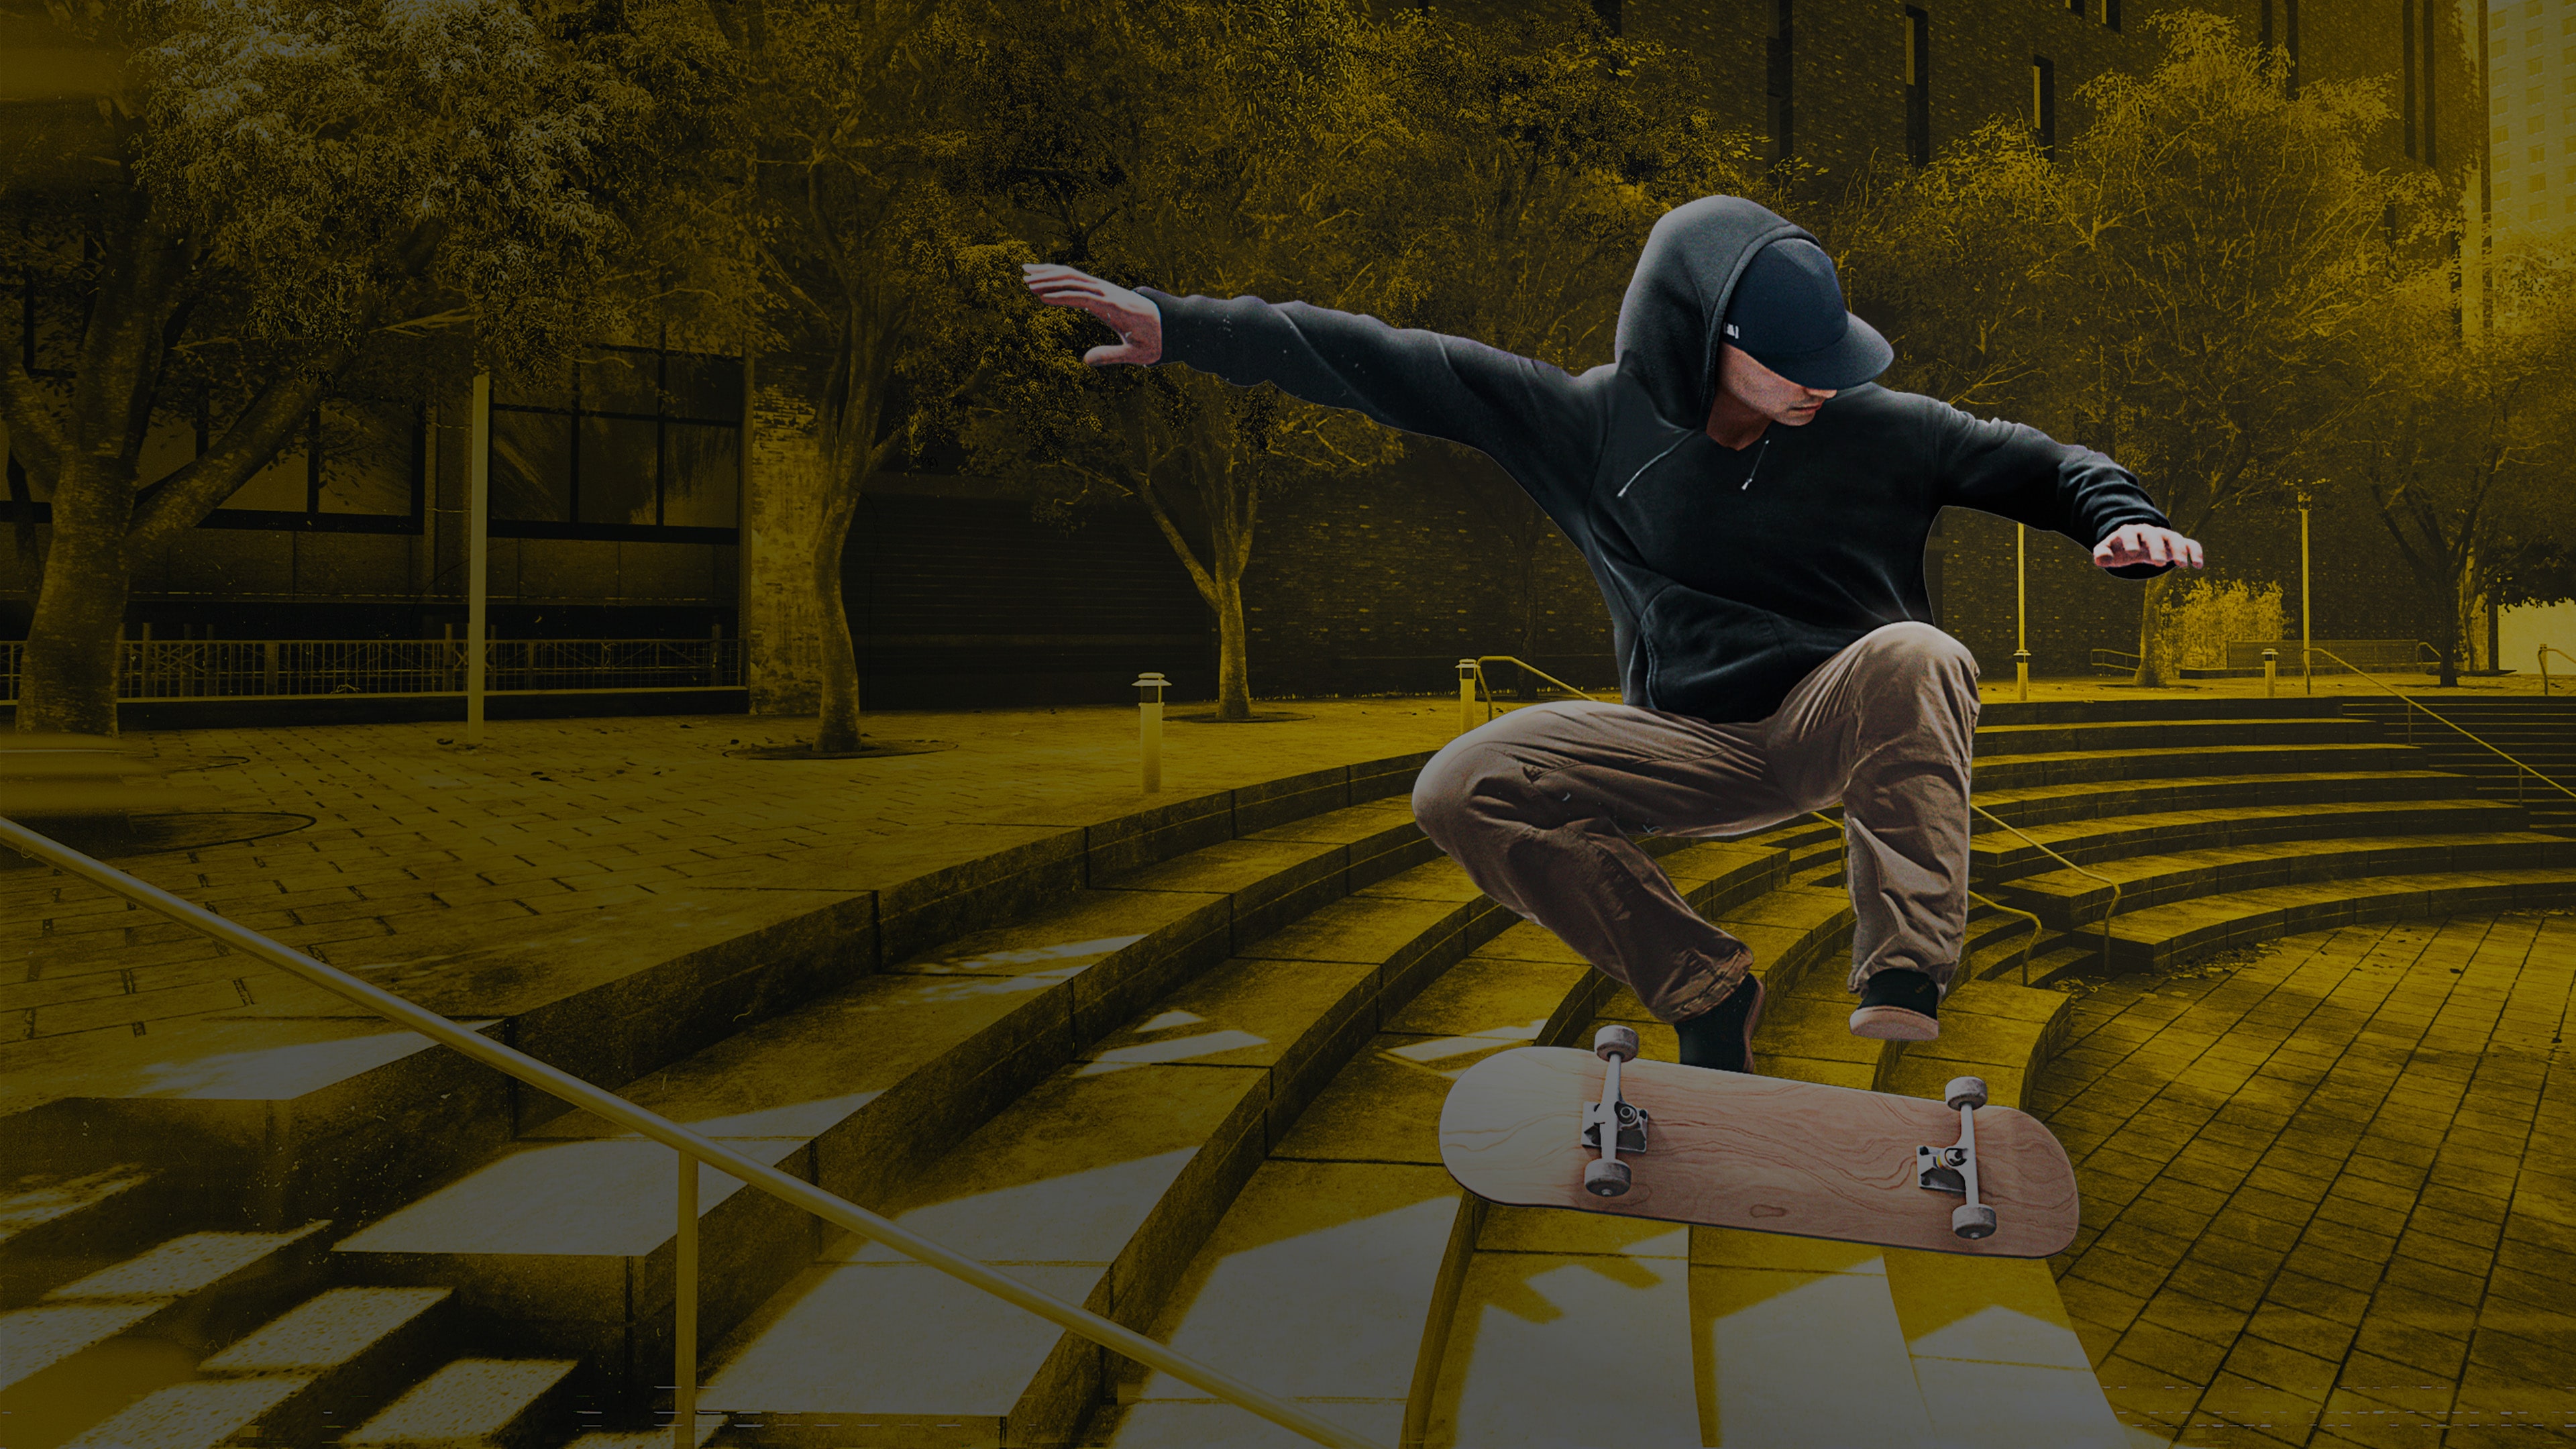 Top 10 Best Offline Skate Games for Android and iOS that you need to play!  